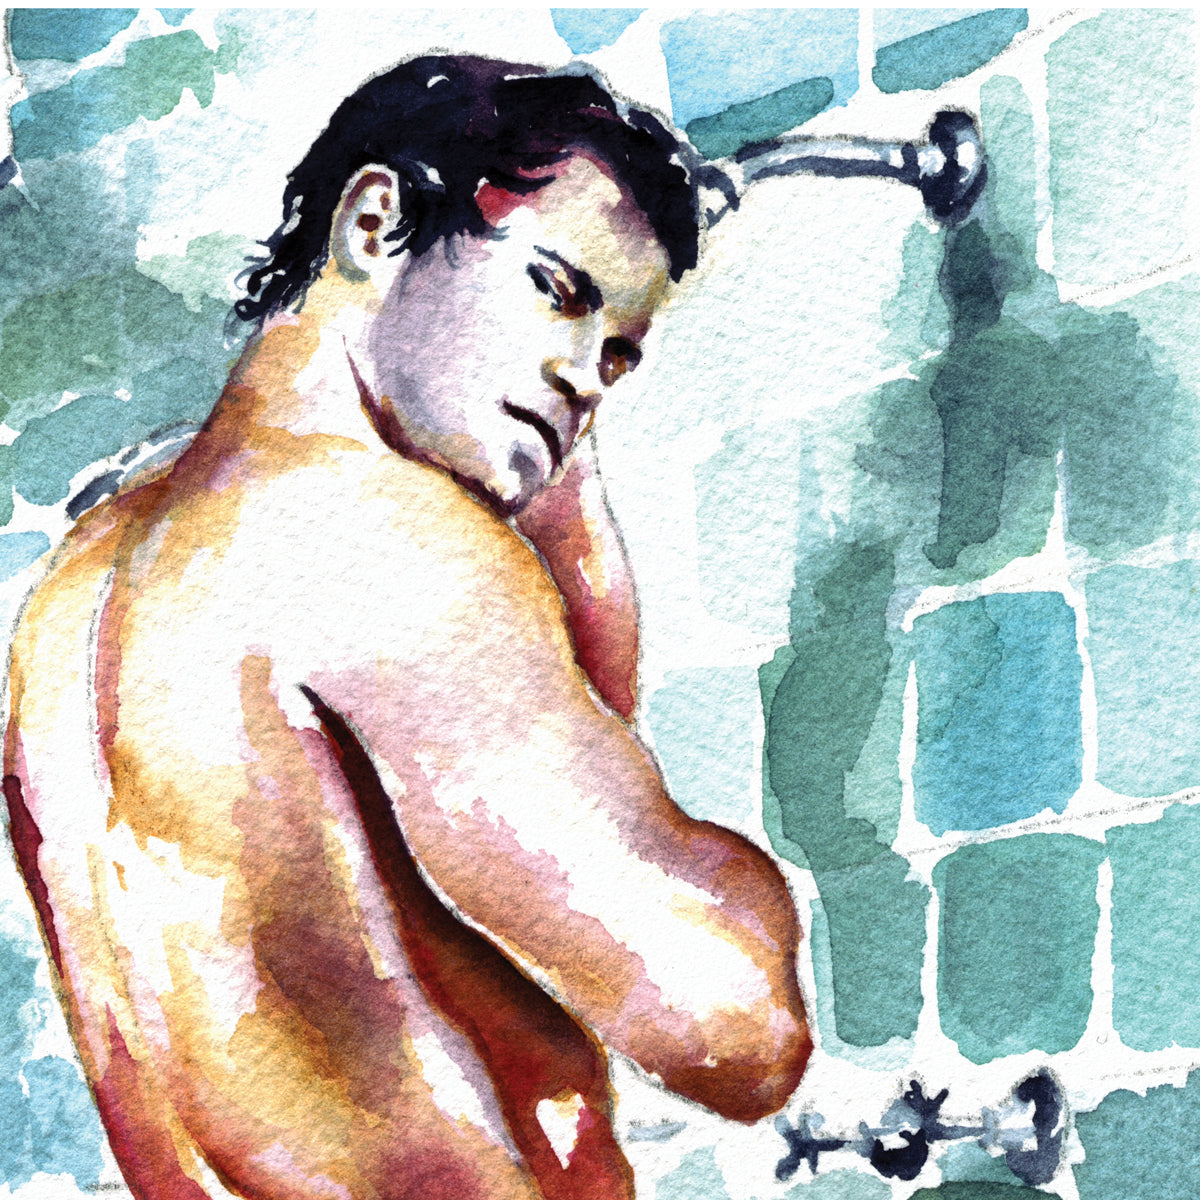 Man in Men's Locker Room, Muscular Figure with Modest Pose & Cute Smile - Giclee Art Print